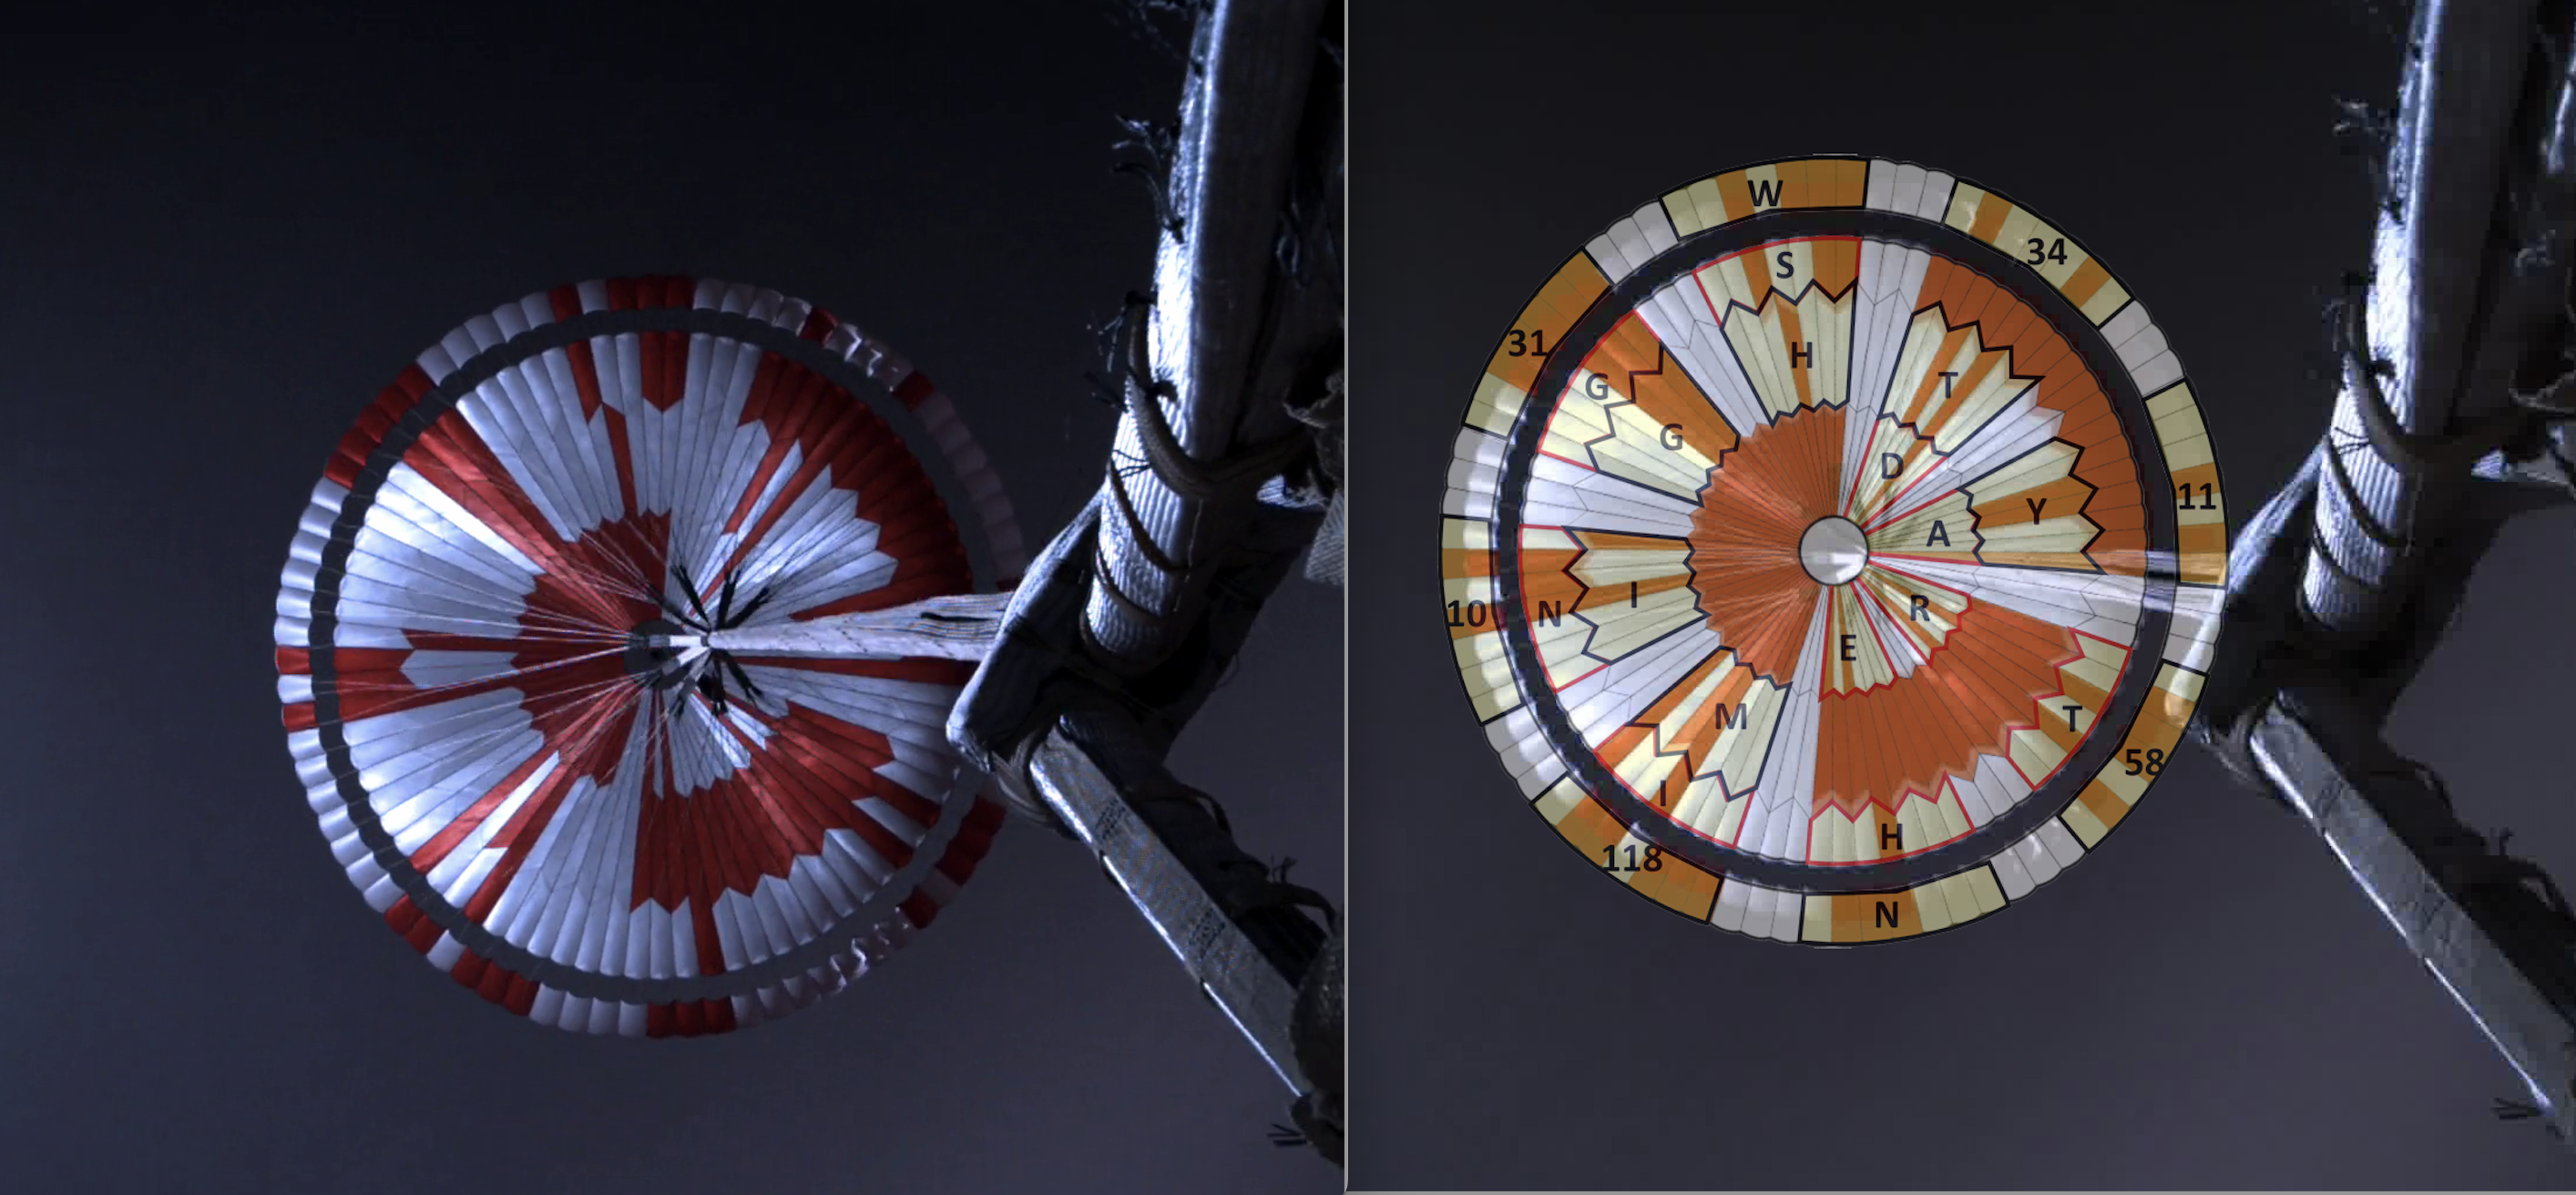 As the Perseverance rover was landing, cameras took pictures of the parachute during its descent through the Martian atmosphere. The images helped engineers know the precise orientation of the parachute as it is inflated.